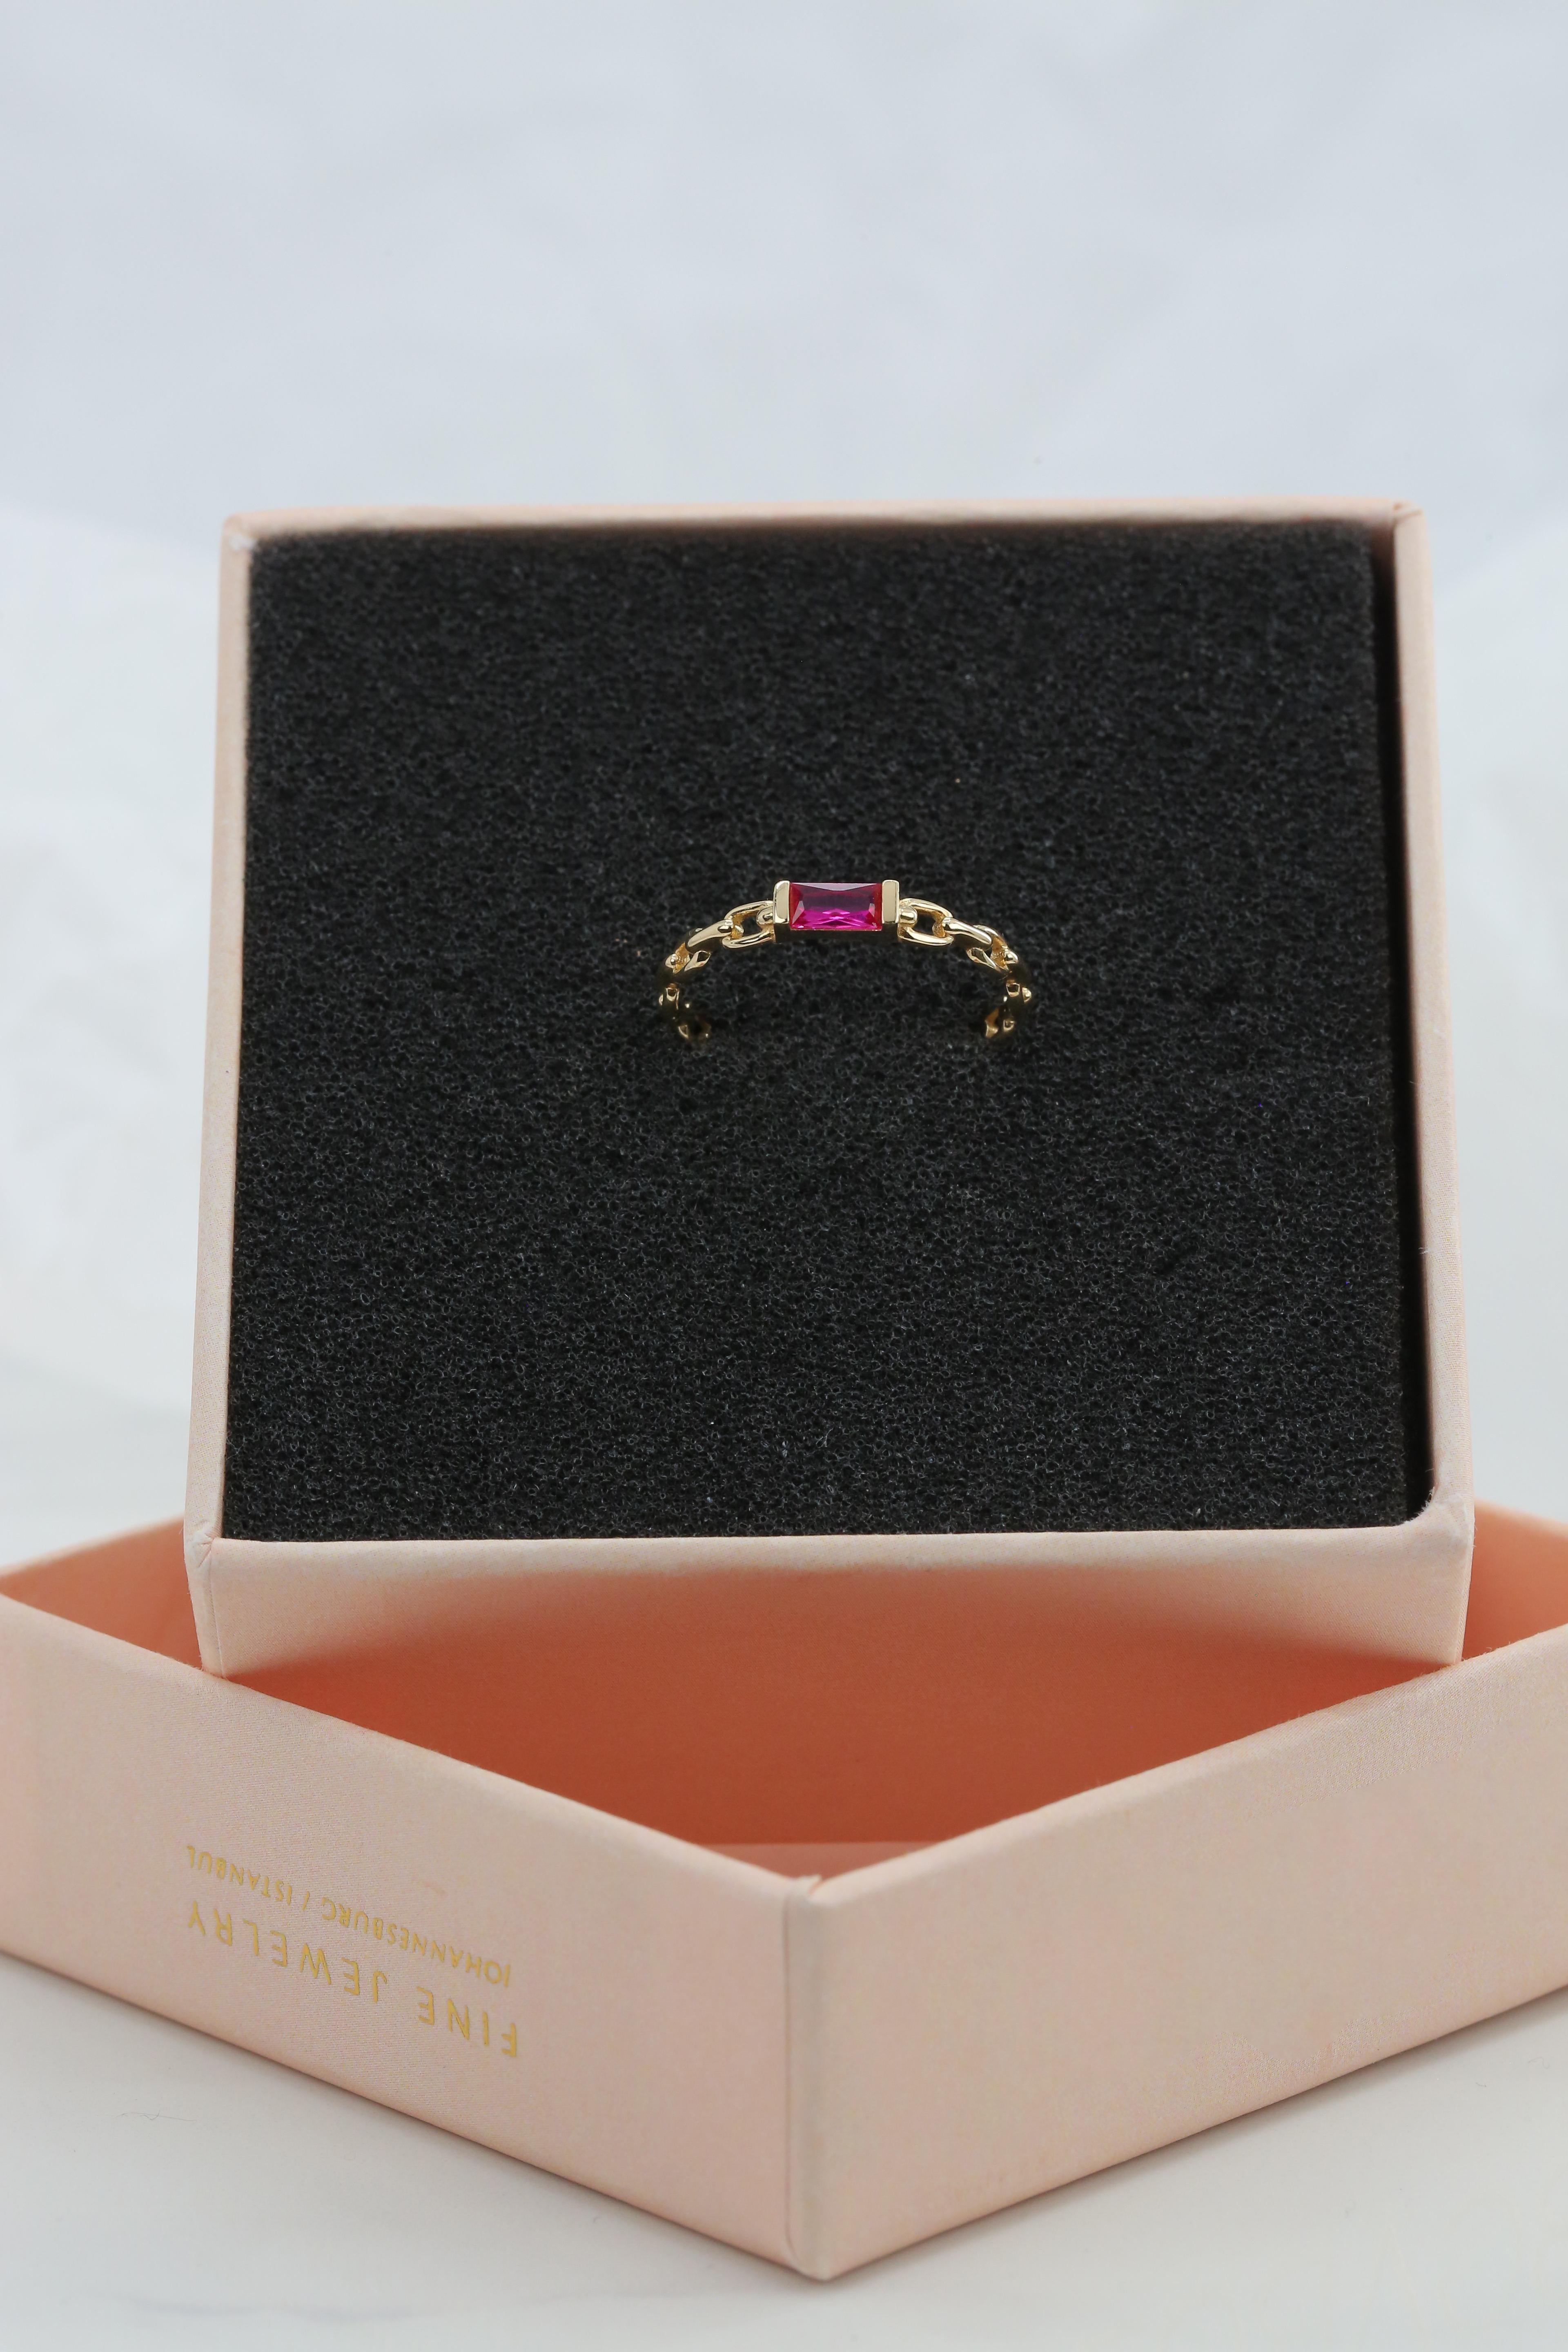 For Sale:  14 K Solid Gold Chain Link Ring -with Pink Quartz, Modern Minimal Ring 9